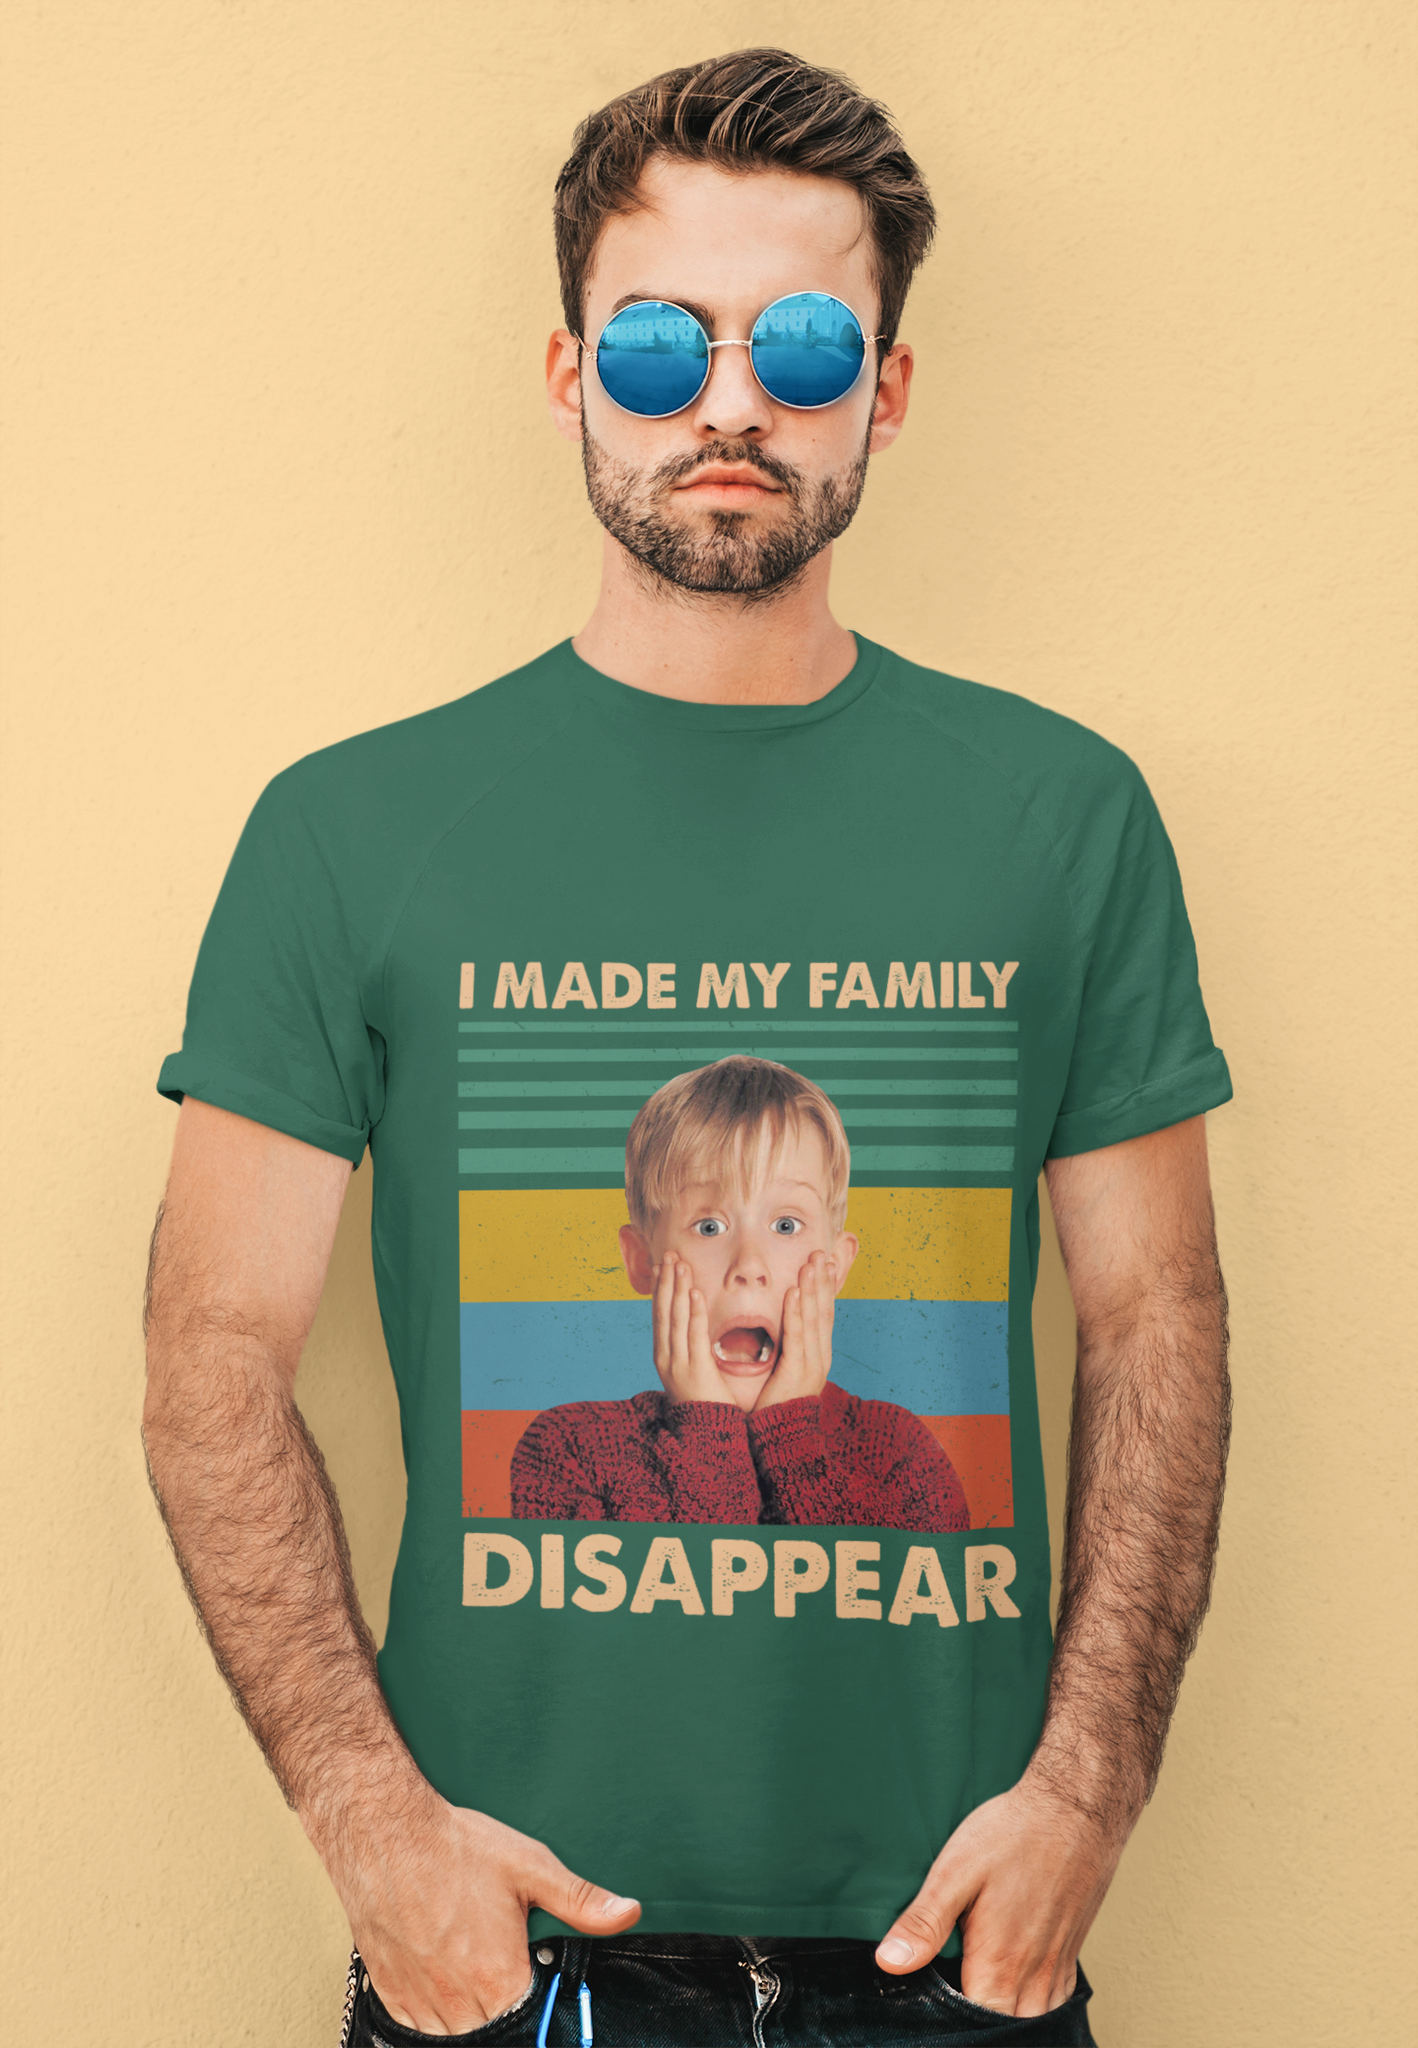 Home Alone Vintage T Shirt, I Made My Family Disappear Tshirt, Kevin McCallister T Shirt, Christmas Gifts